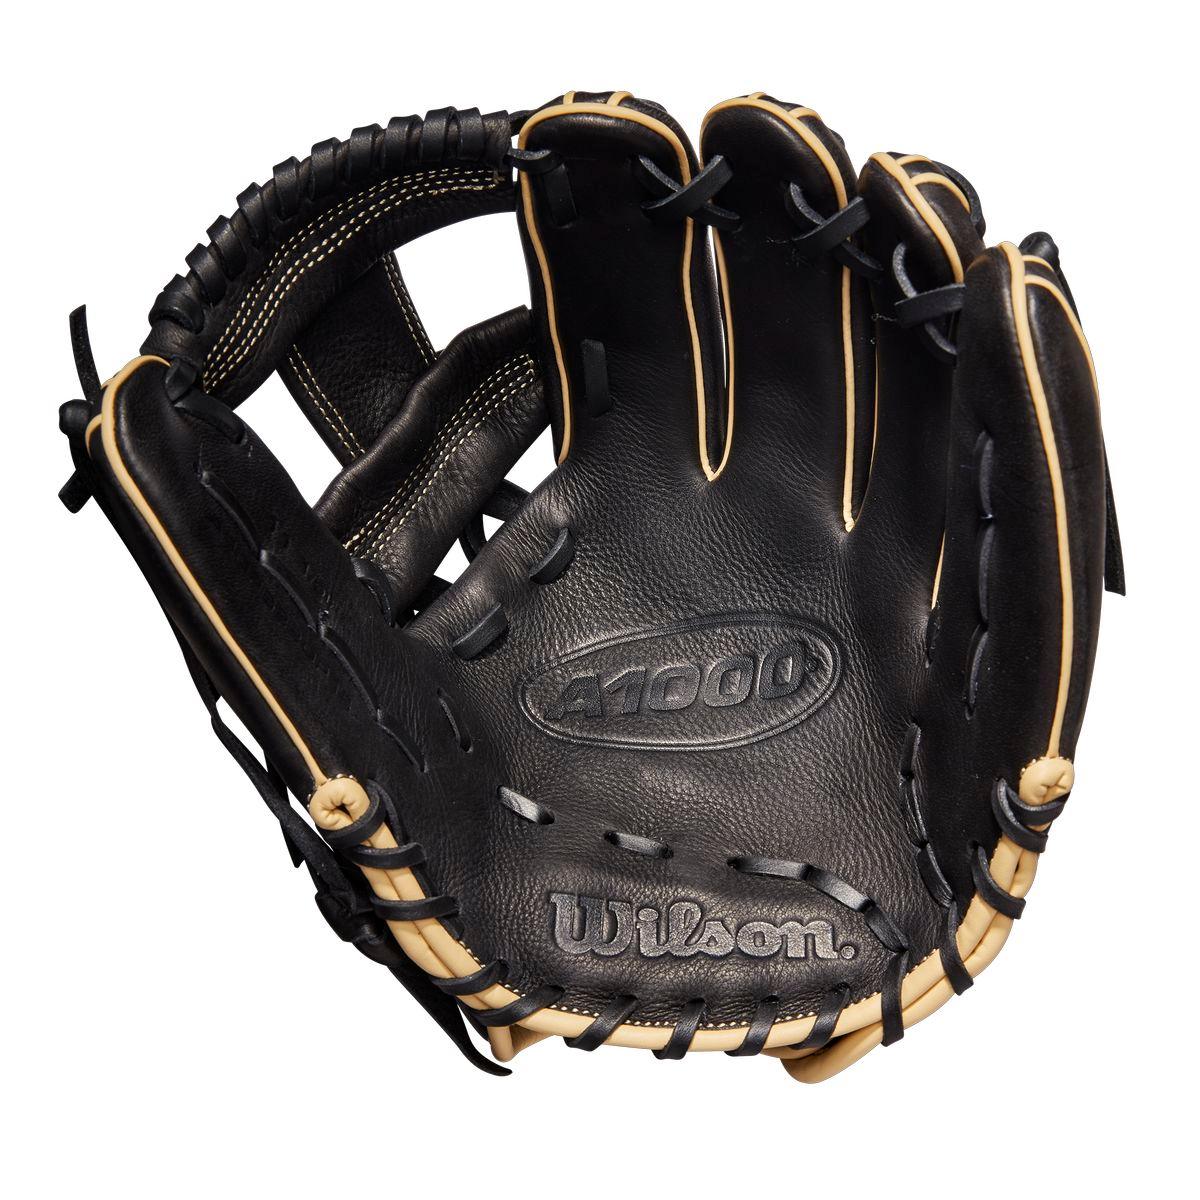 A1000 11.5" Baseball Glove Pedroia Fit - Sports Excellence